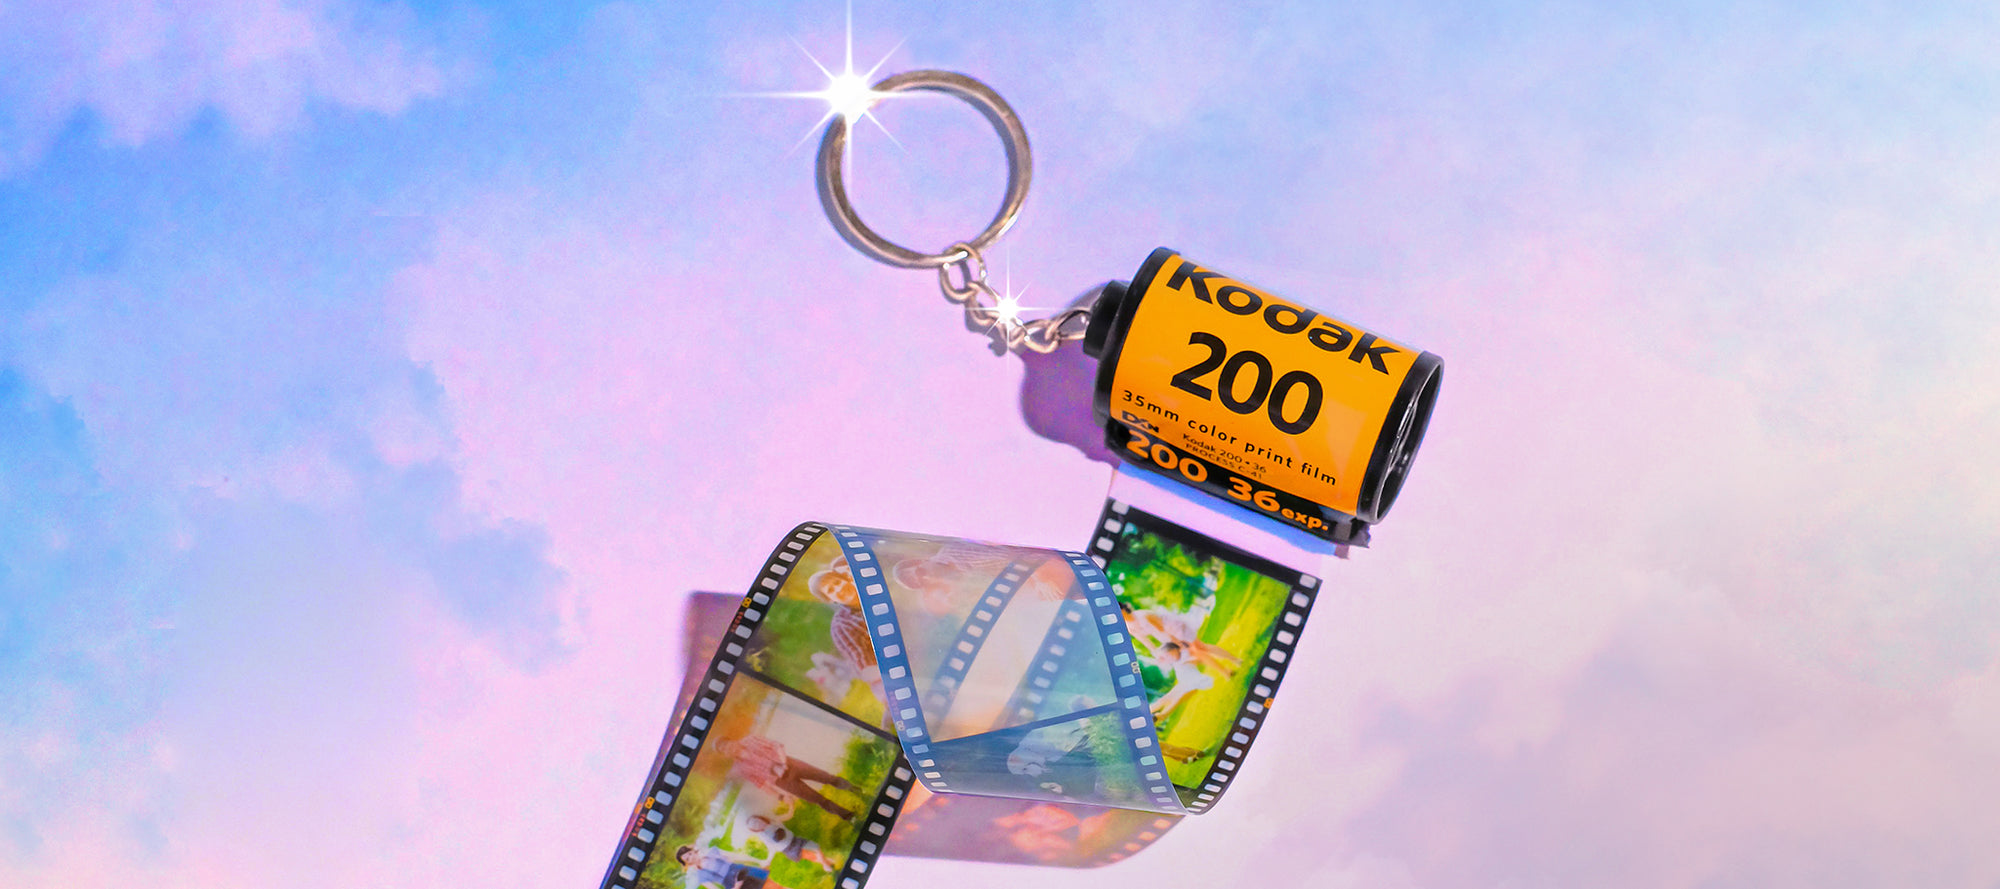 Keep your memories close with a Personalised Camera Roll Keychain